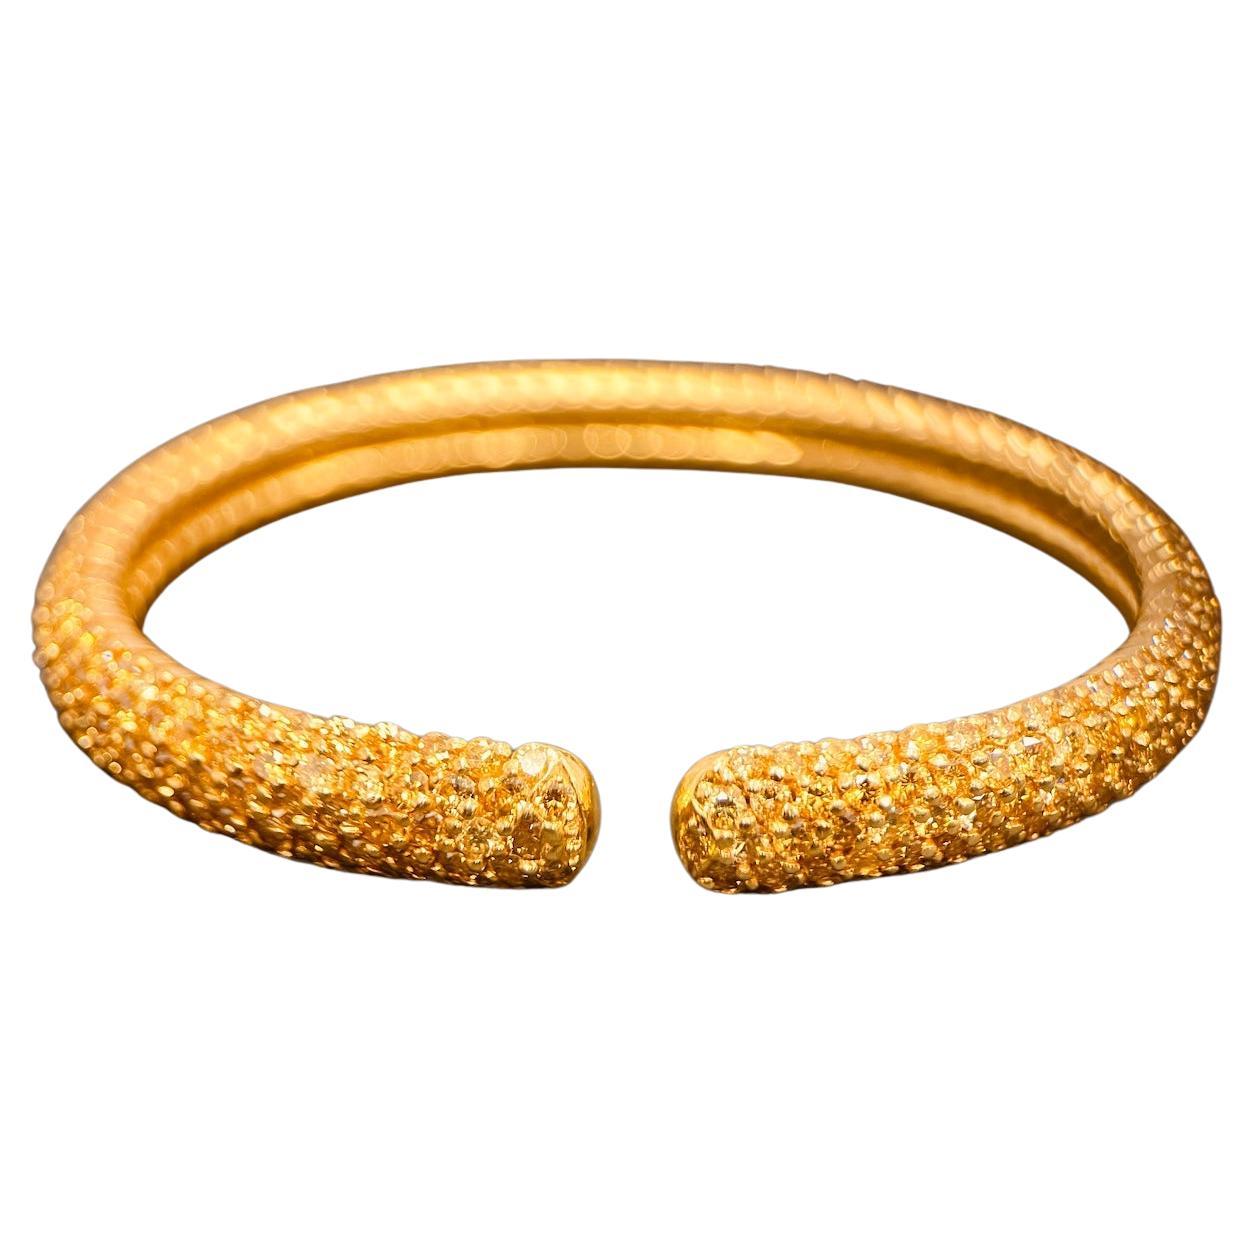 A 12 Carats Pave' Set Fancy Yellow Diamond Bangle, 9mm Width For Sale